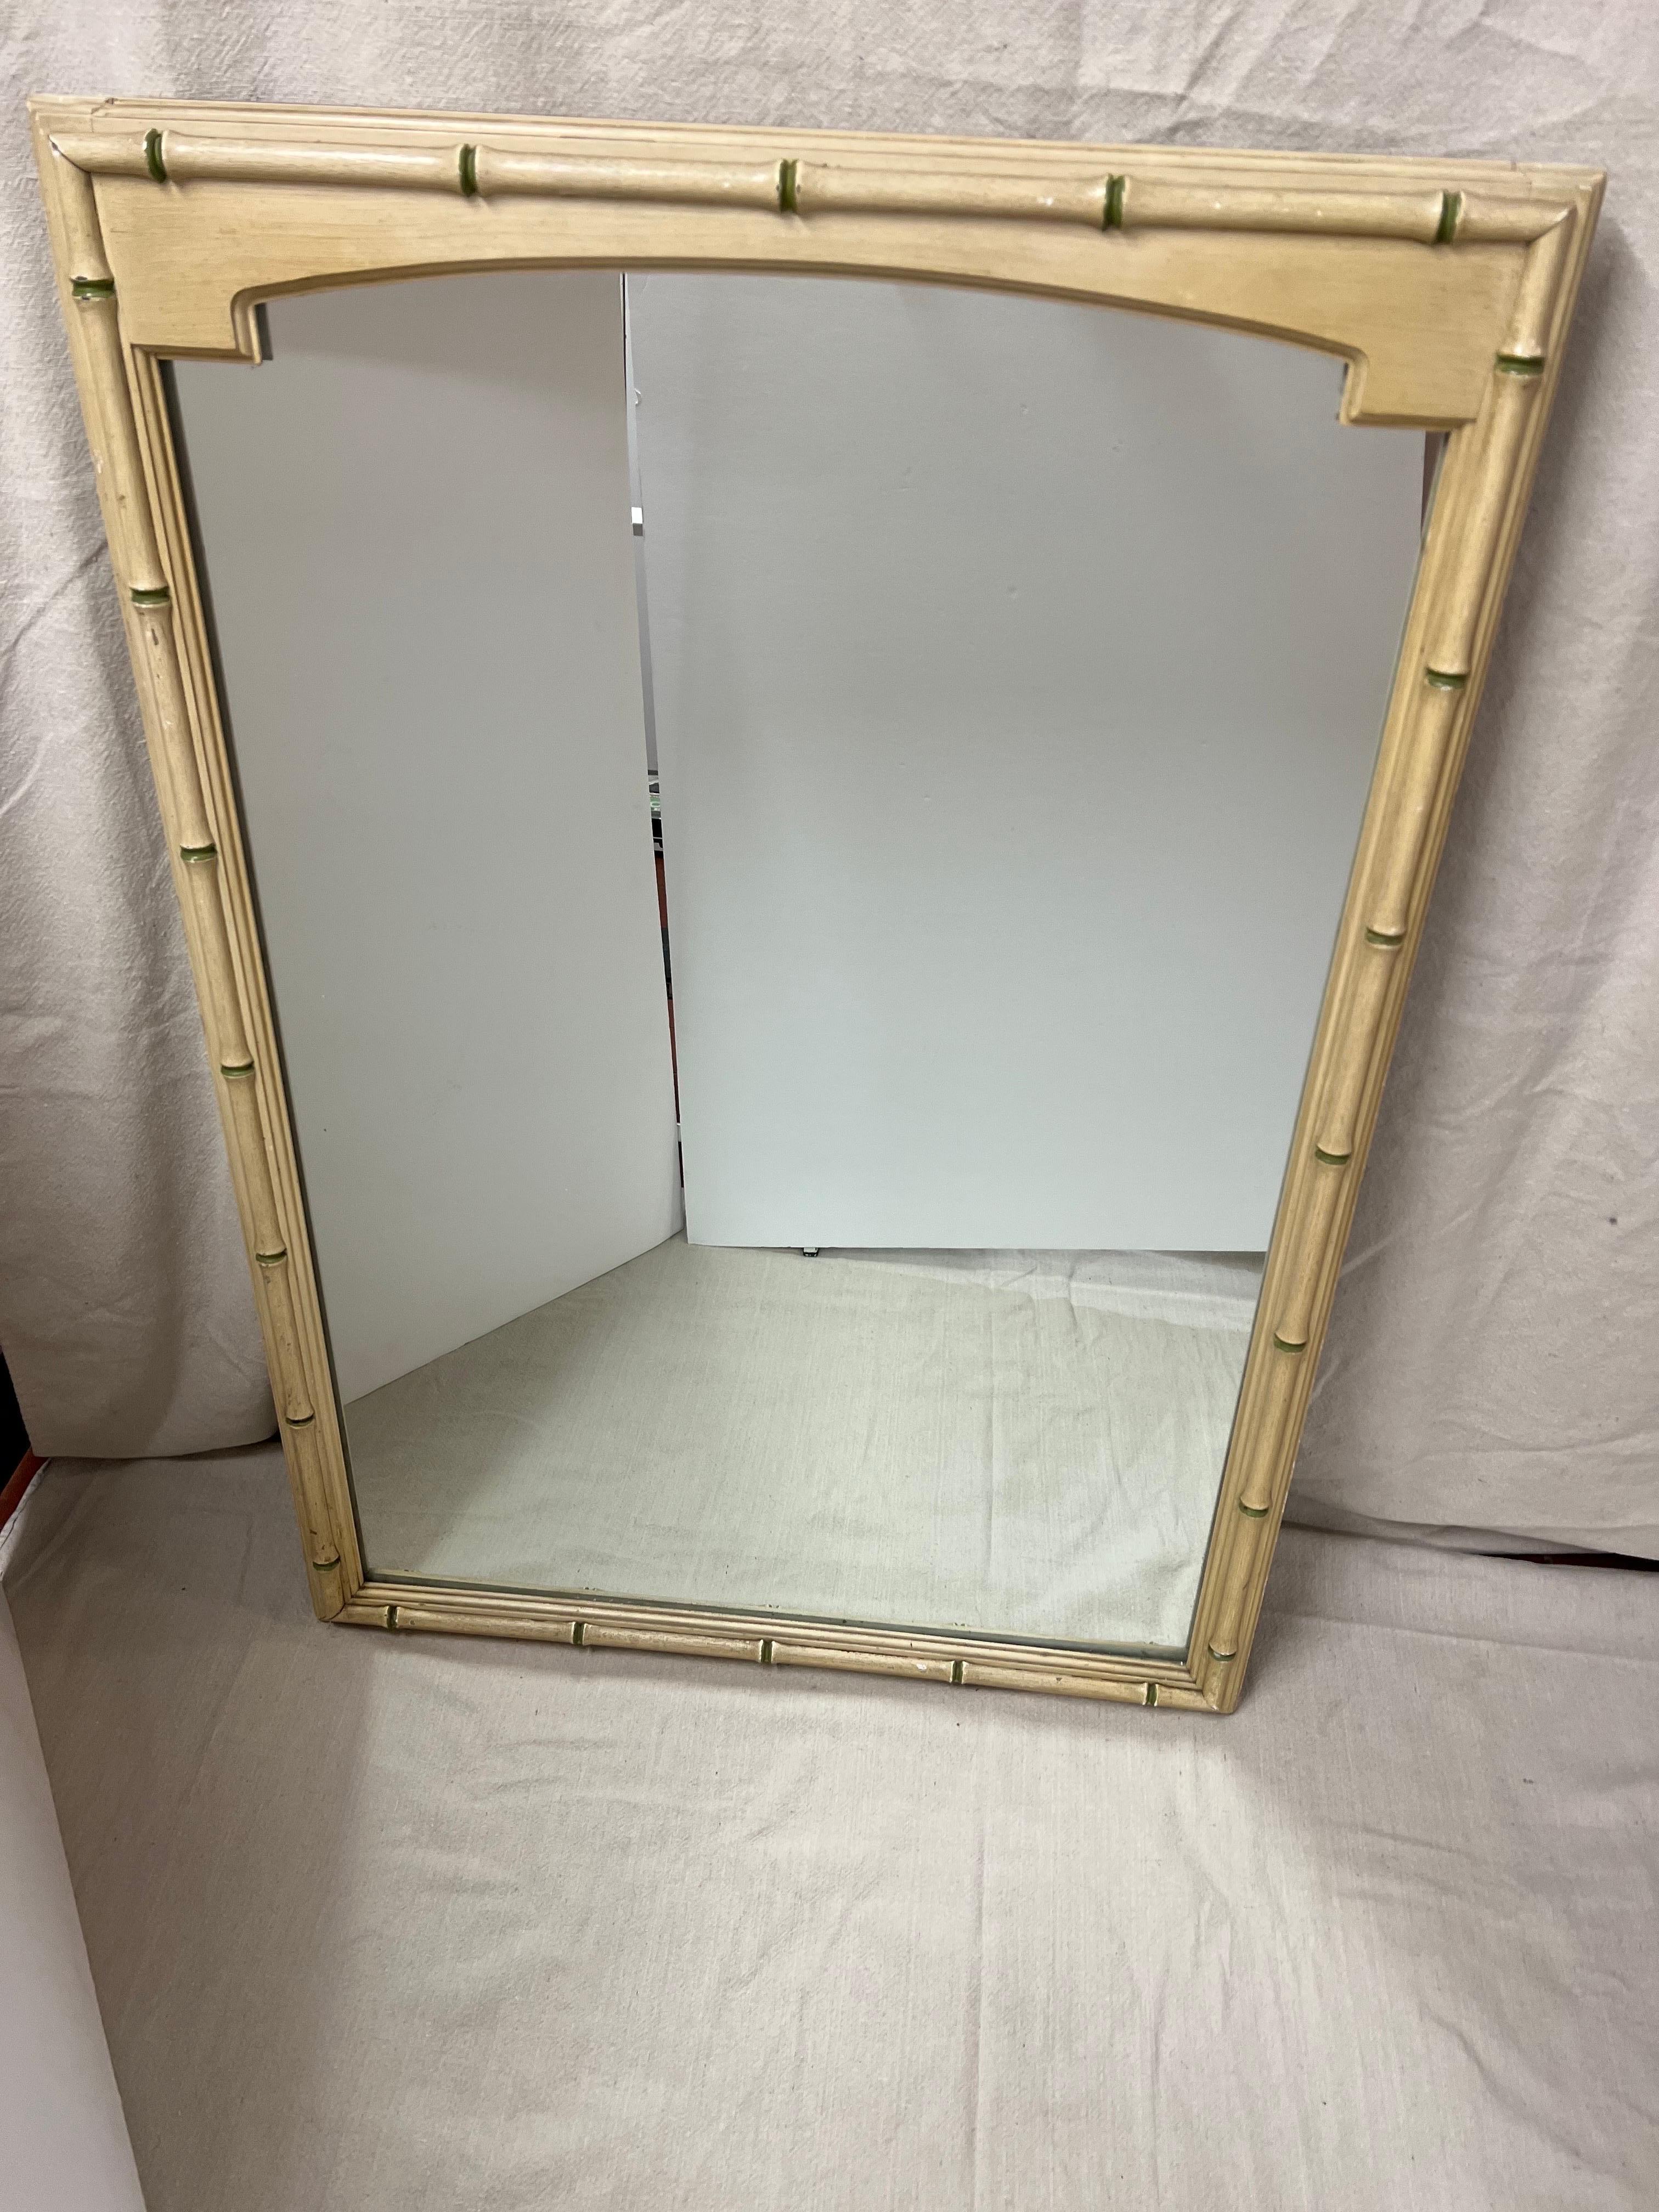 Thomasville Allegro Faux Bamboo Mirror In Good Condition For Sale In Redding, CT